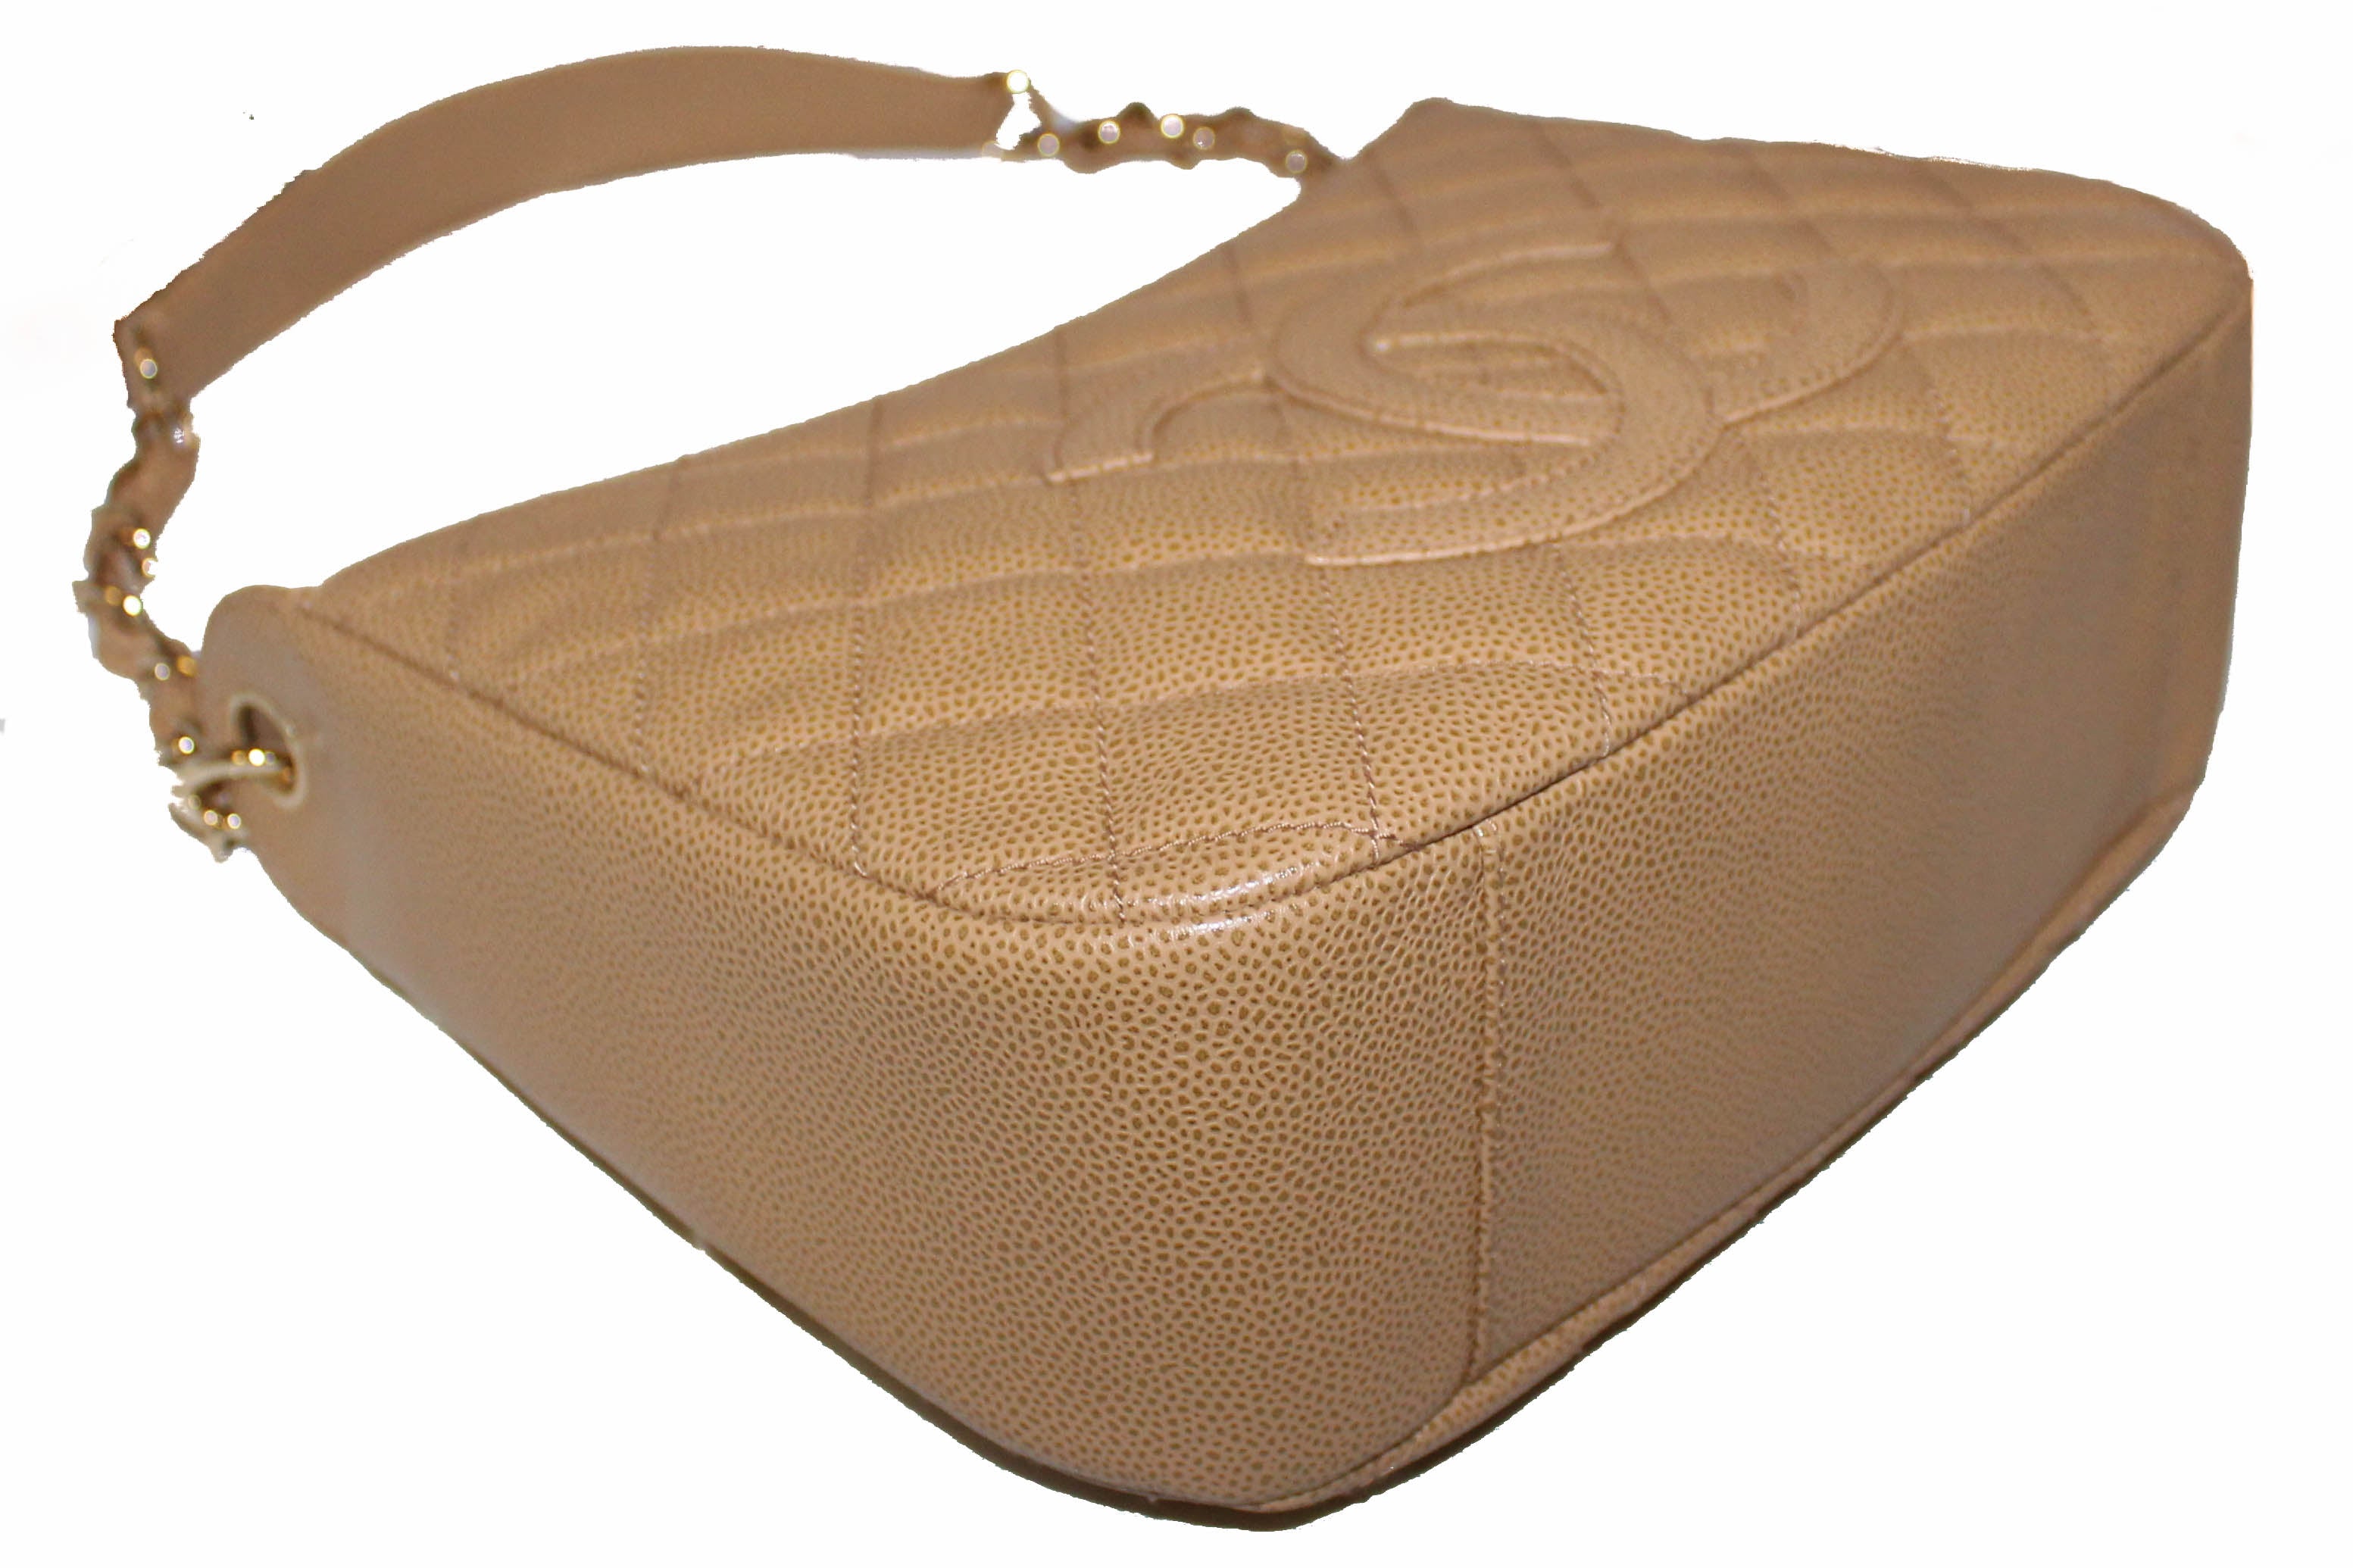 NEW Authentic Chanel Beige Quilted Caviar Leather Hobo Shoulder Bag